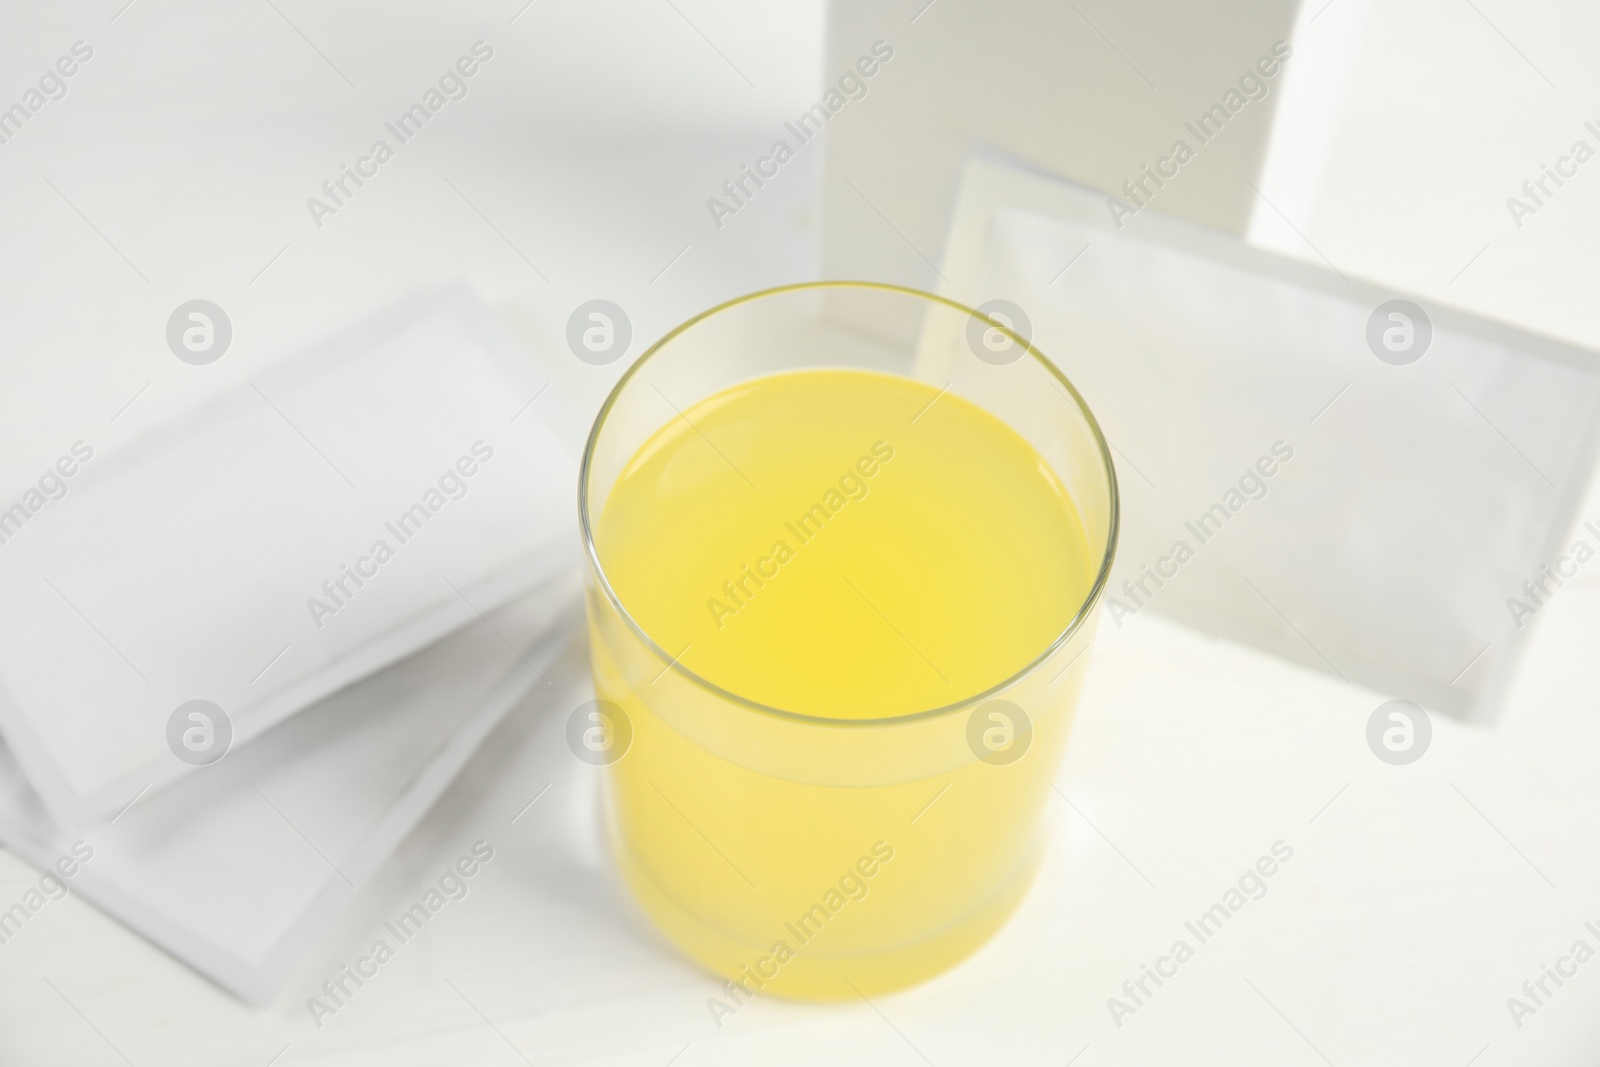 Photo of Medicine sachets and glass with dissolved drug on white table